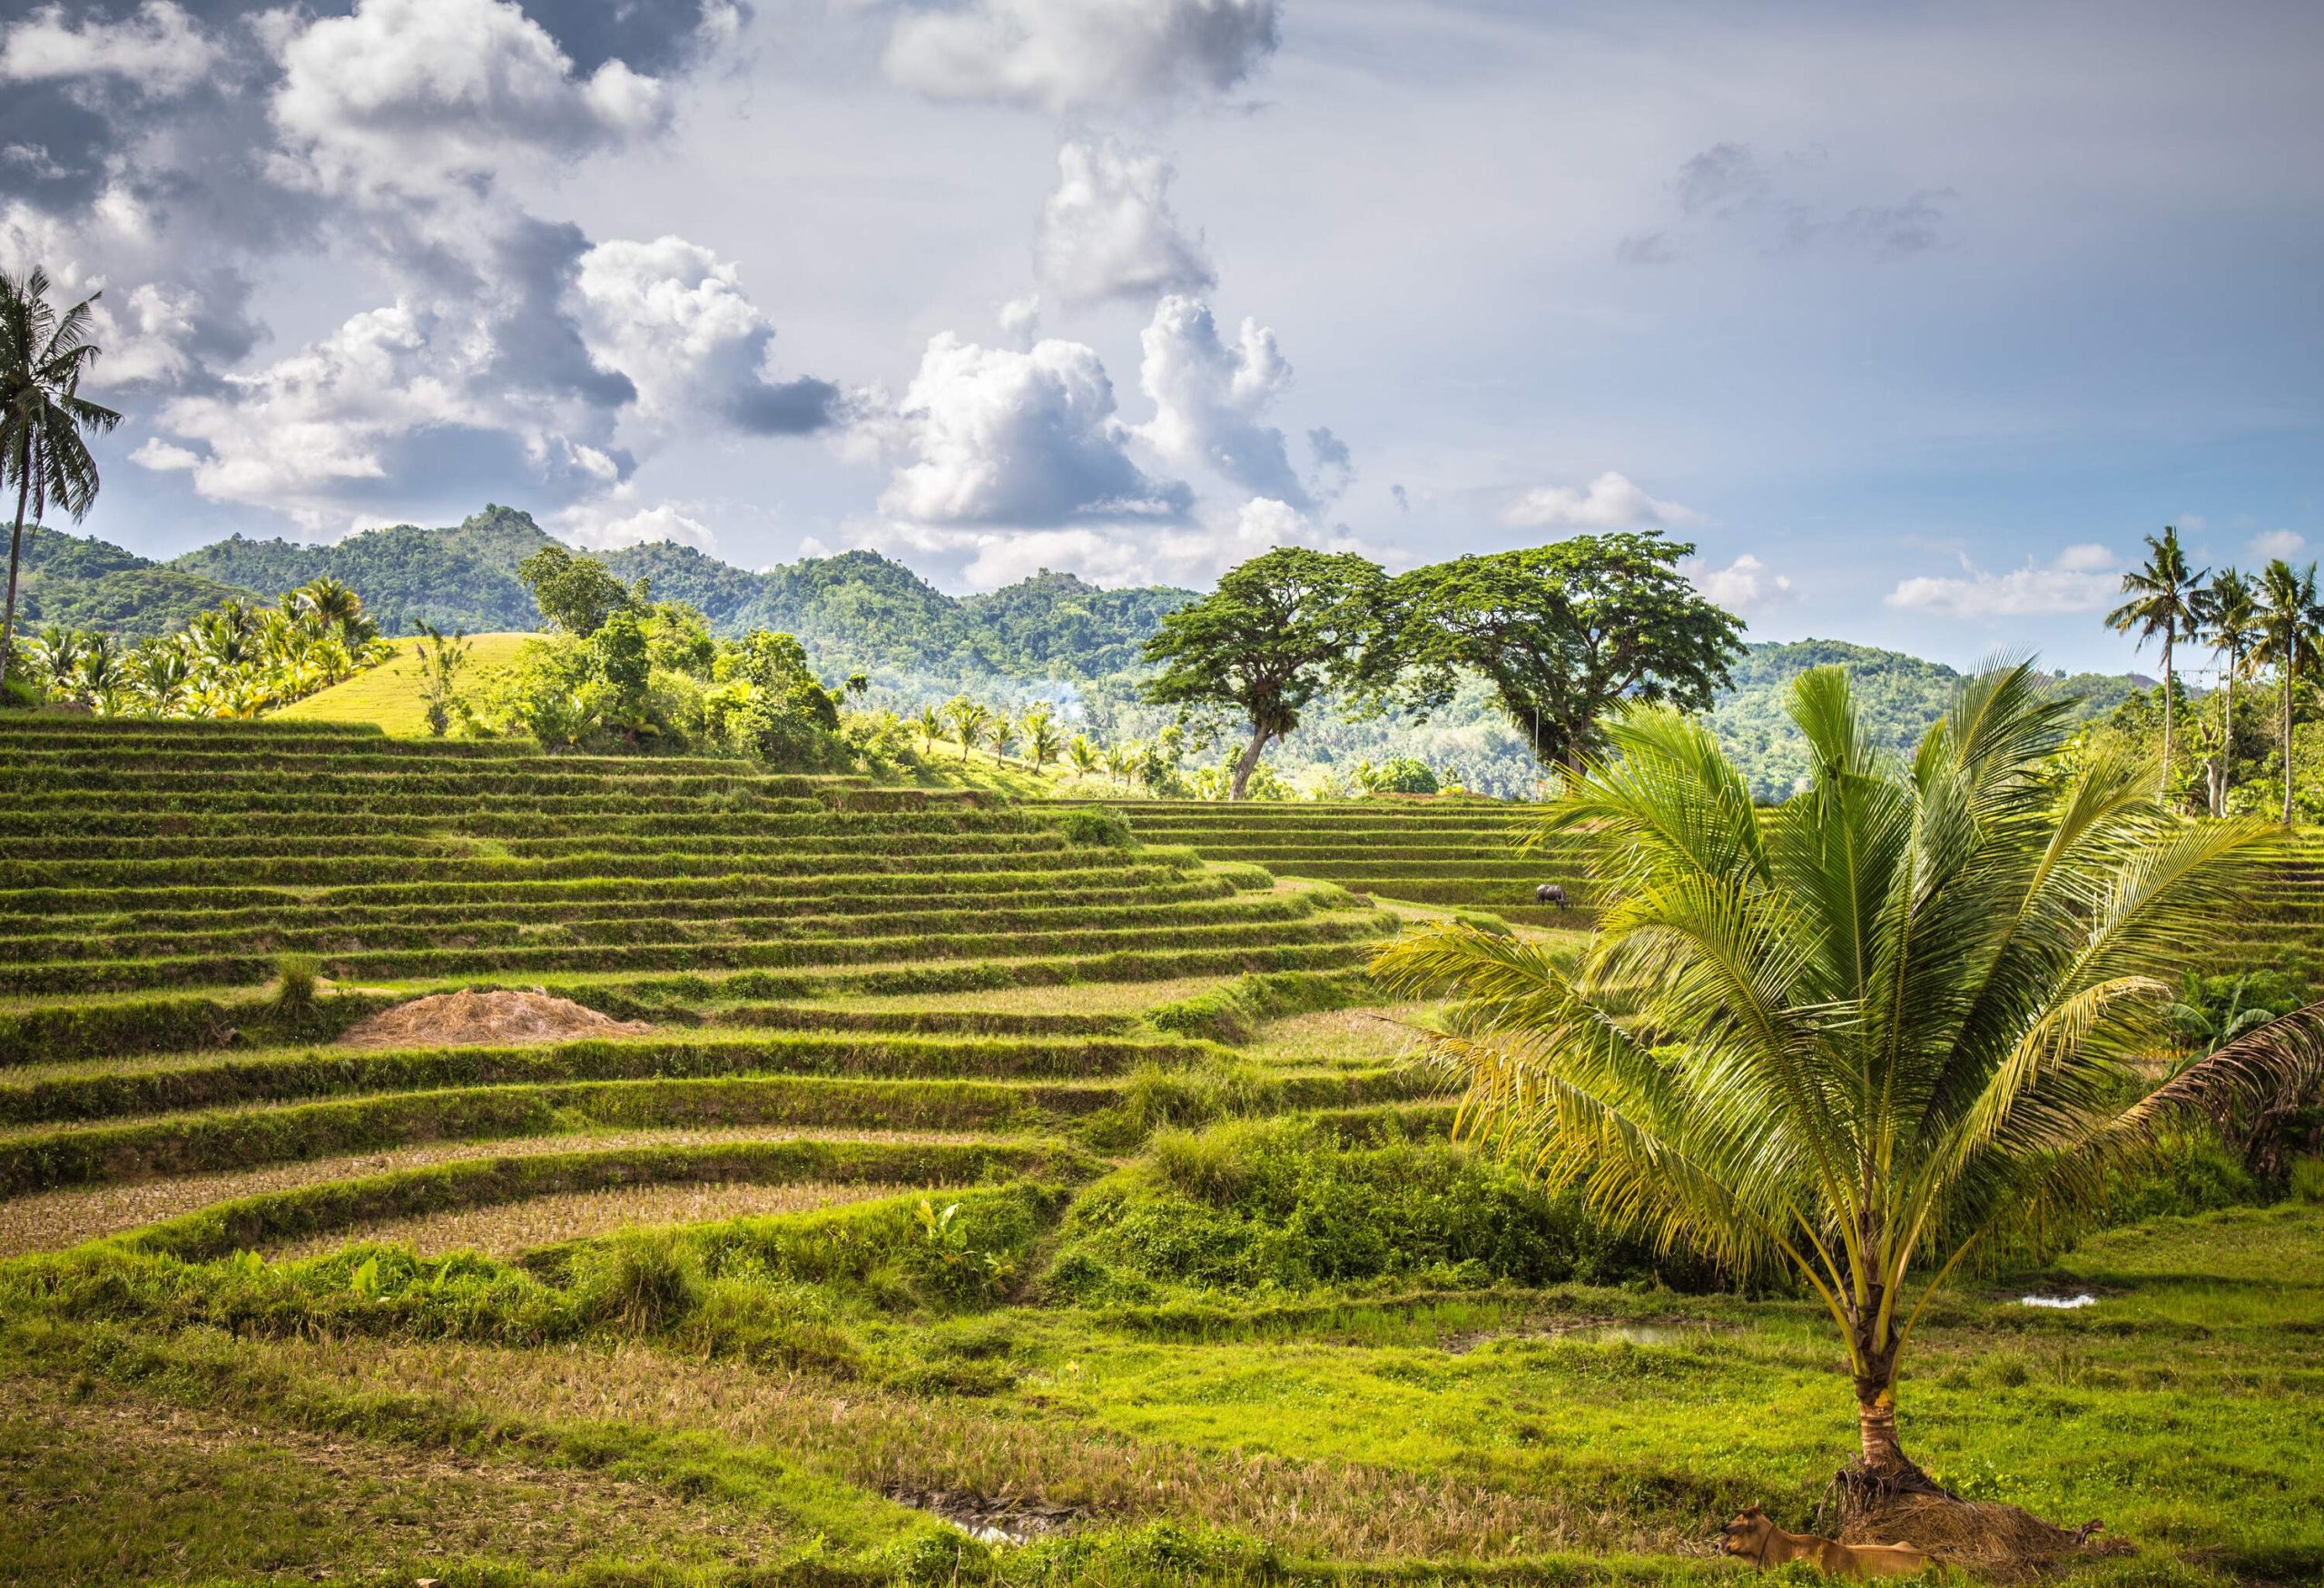 Low-rise Rice Terraces, enveloped by lush greens and trees.